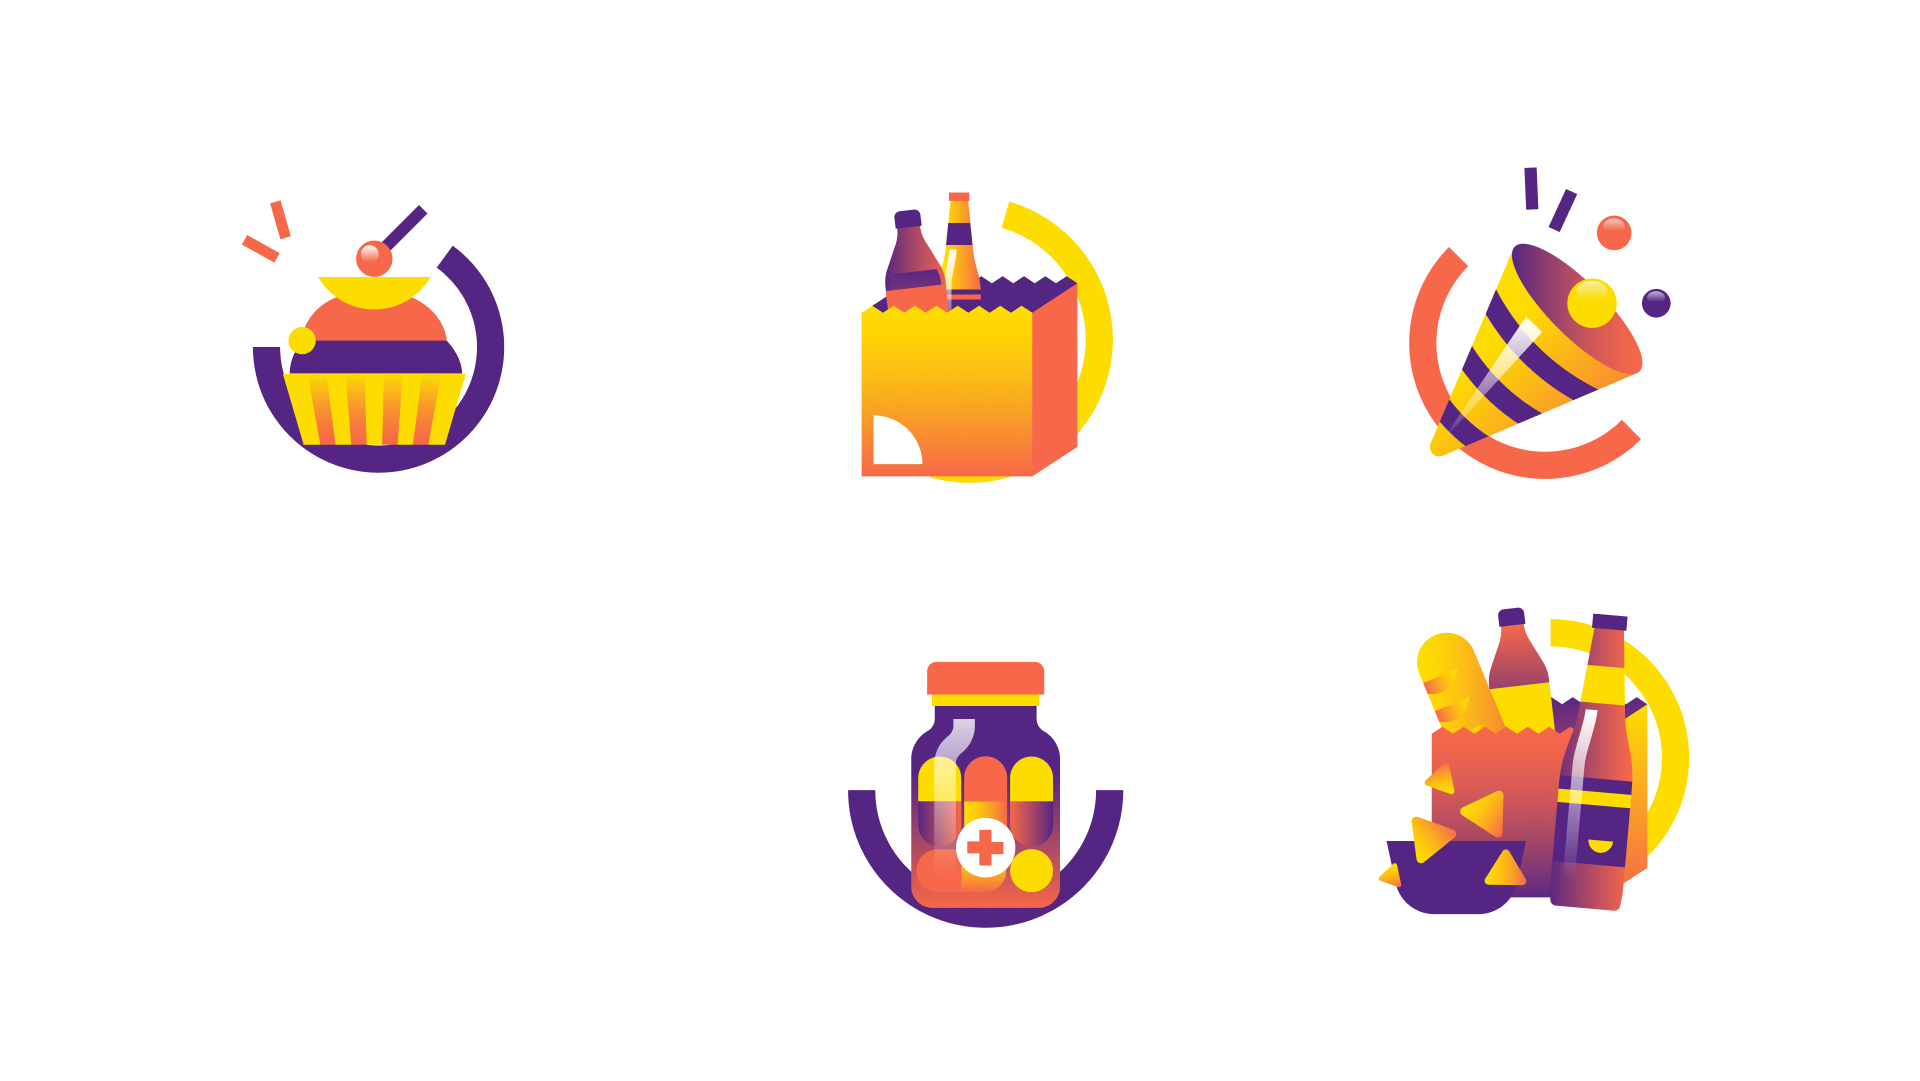 glup-delivery-app-branding-case-study-icons-design